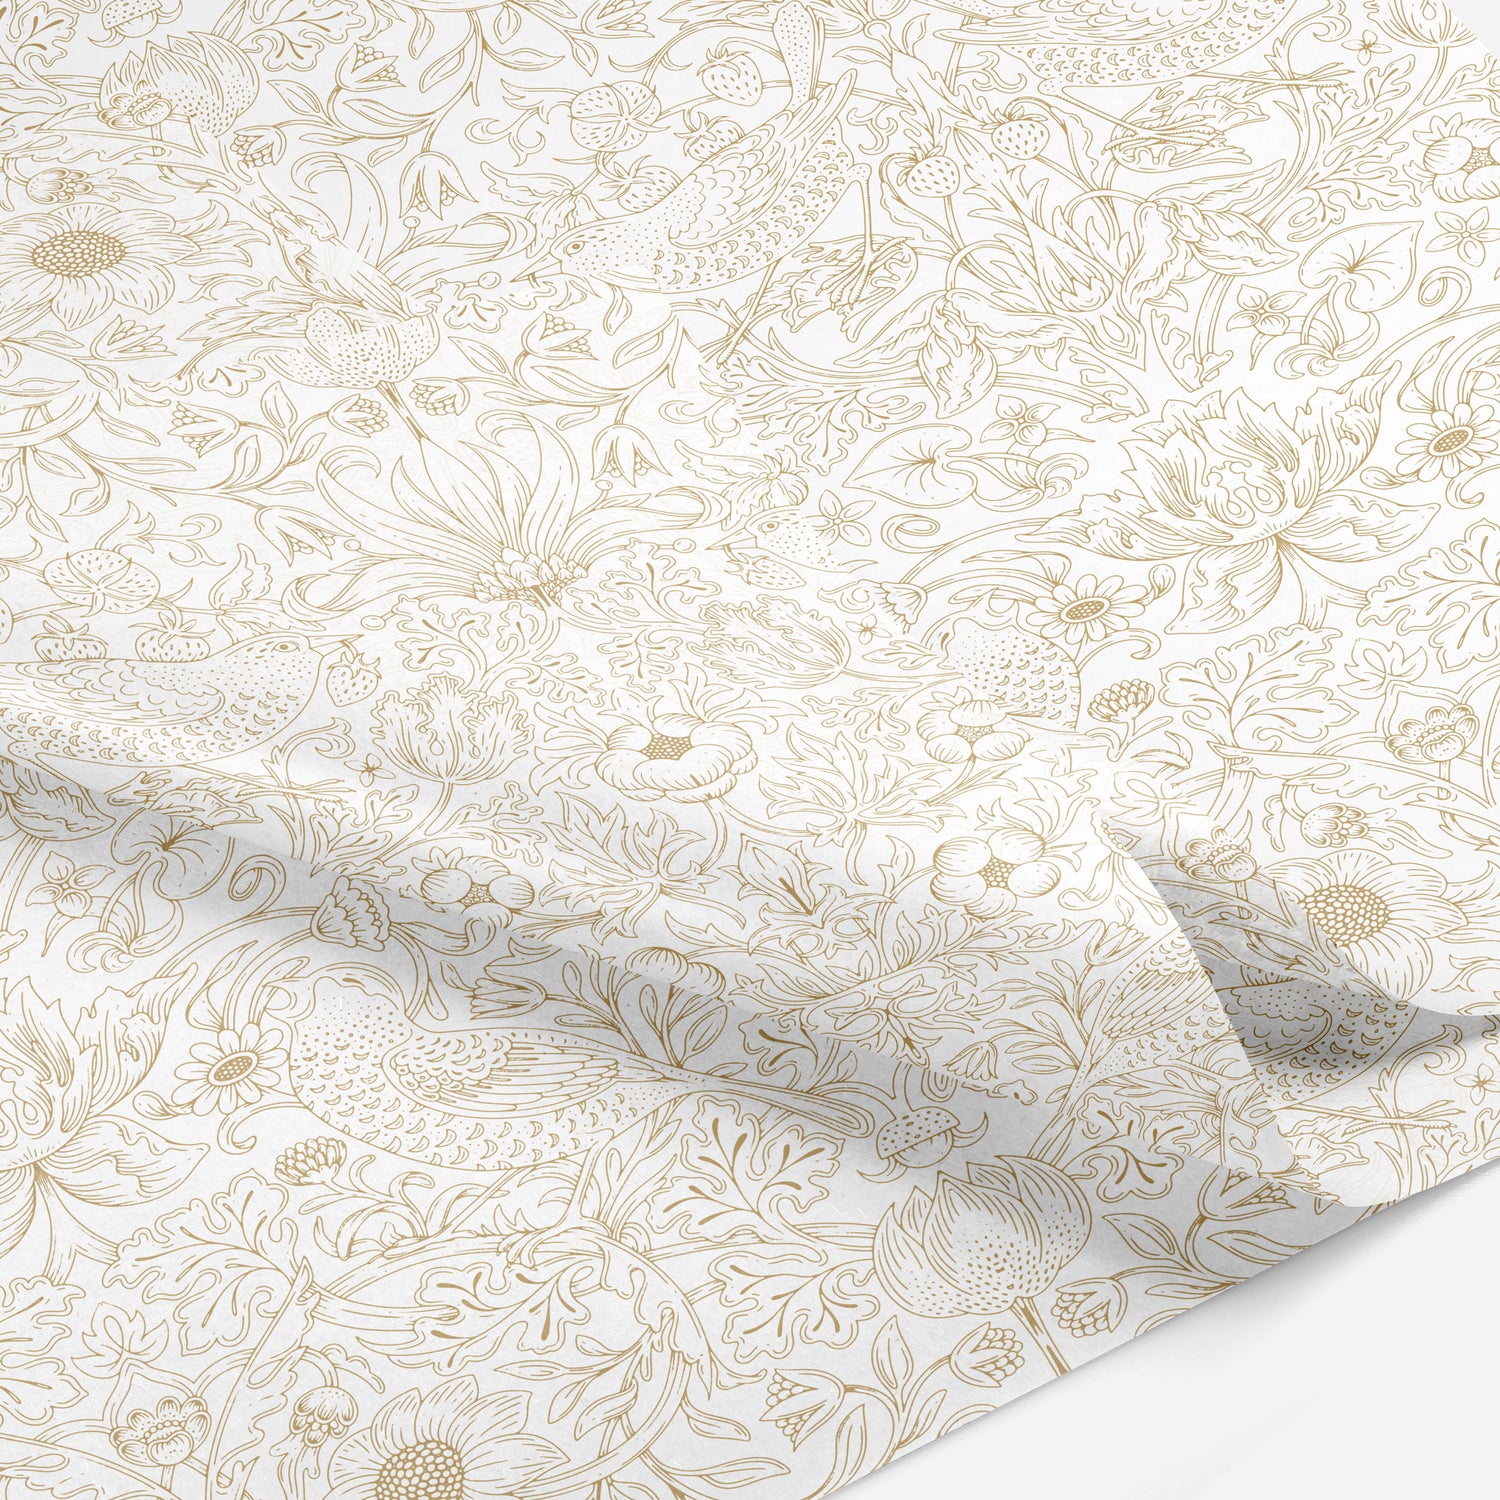 biodegradable and compostable tissue paper with a william morris inspired design